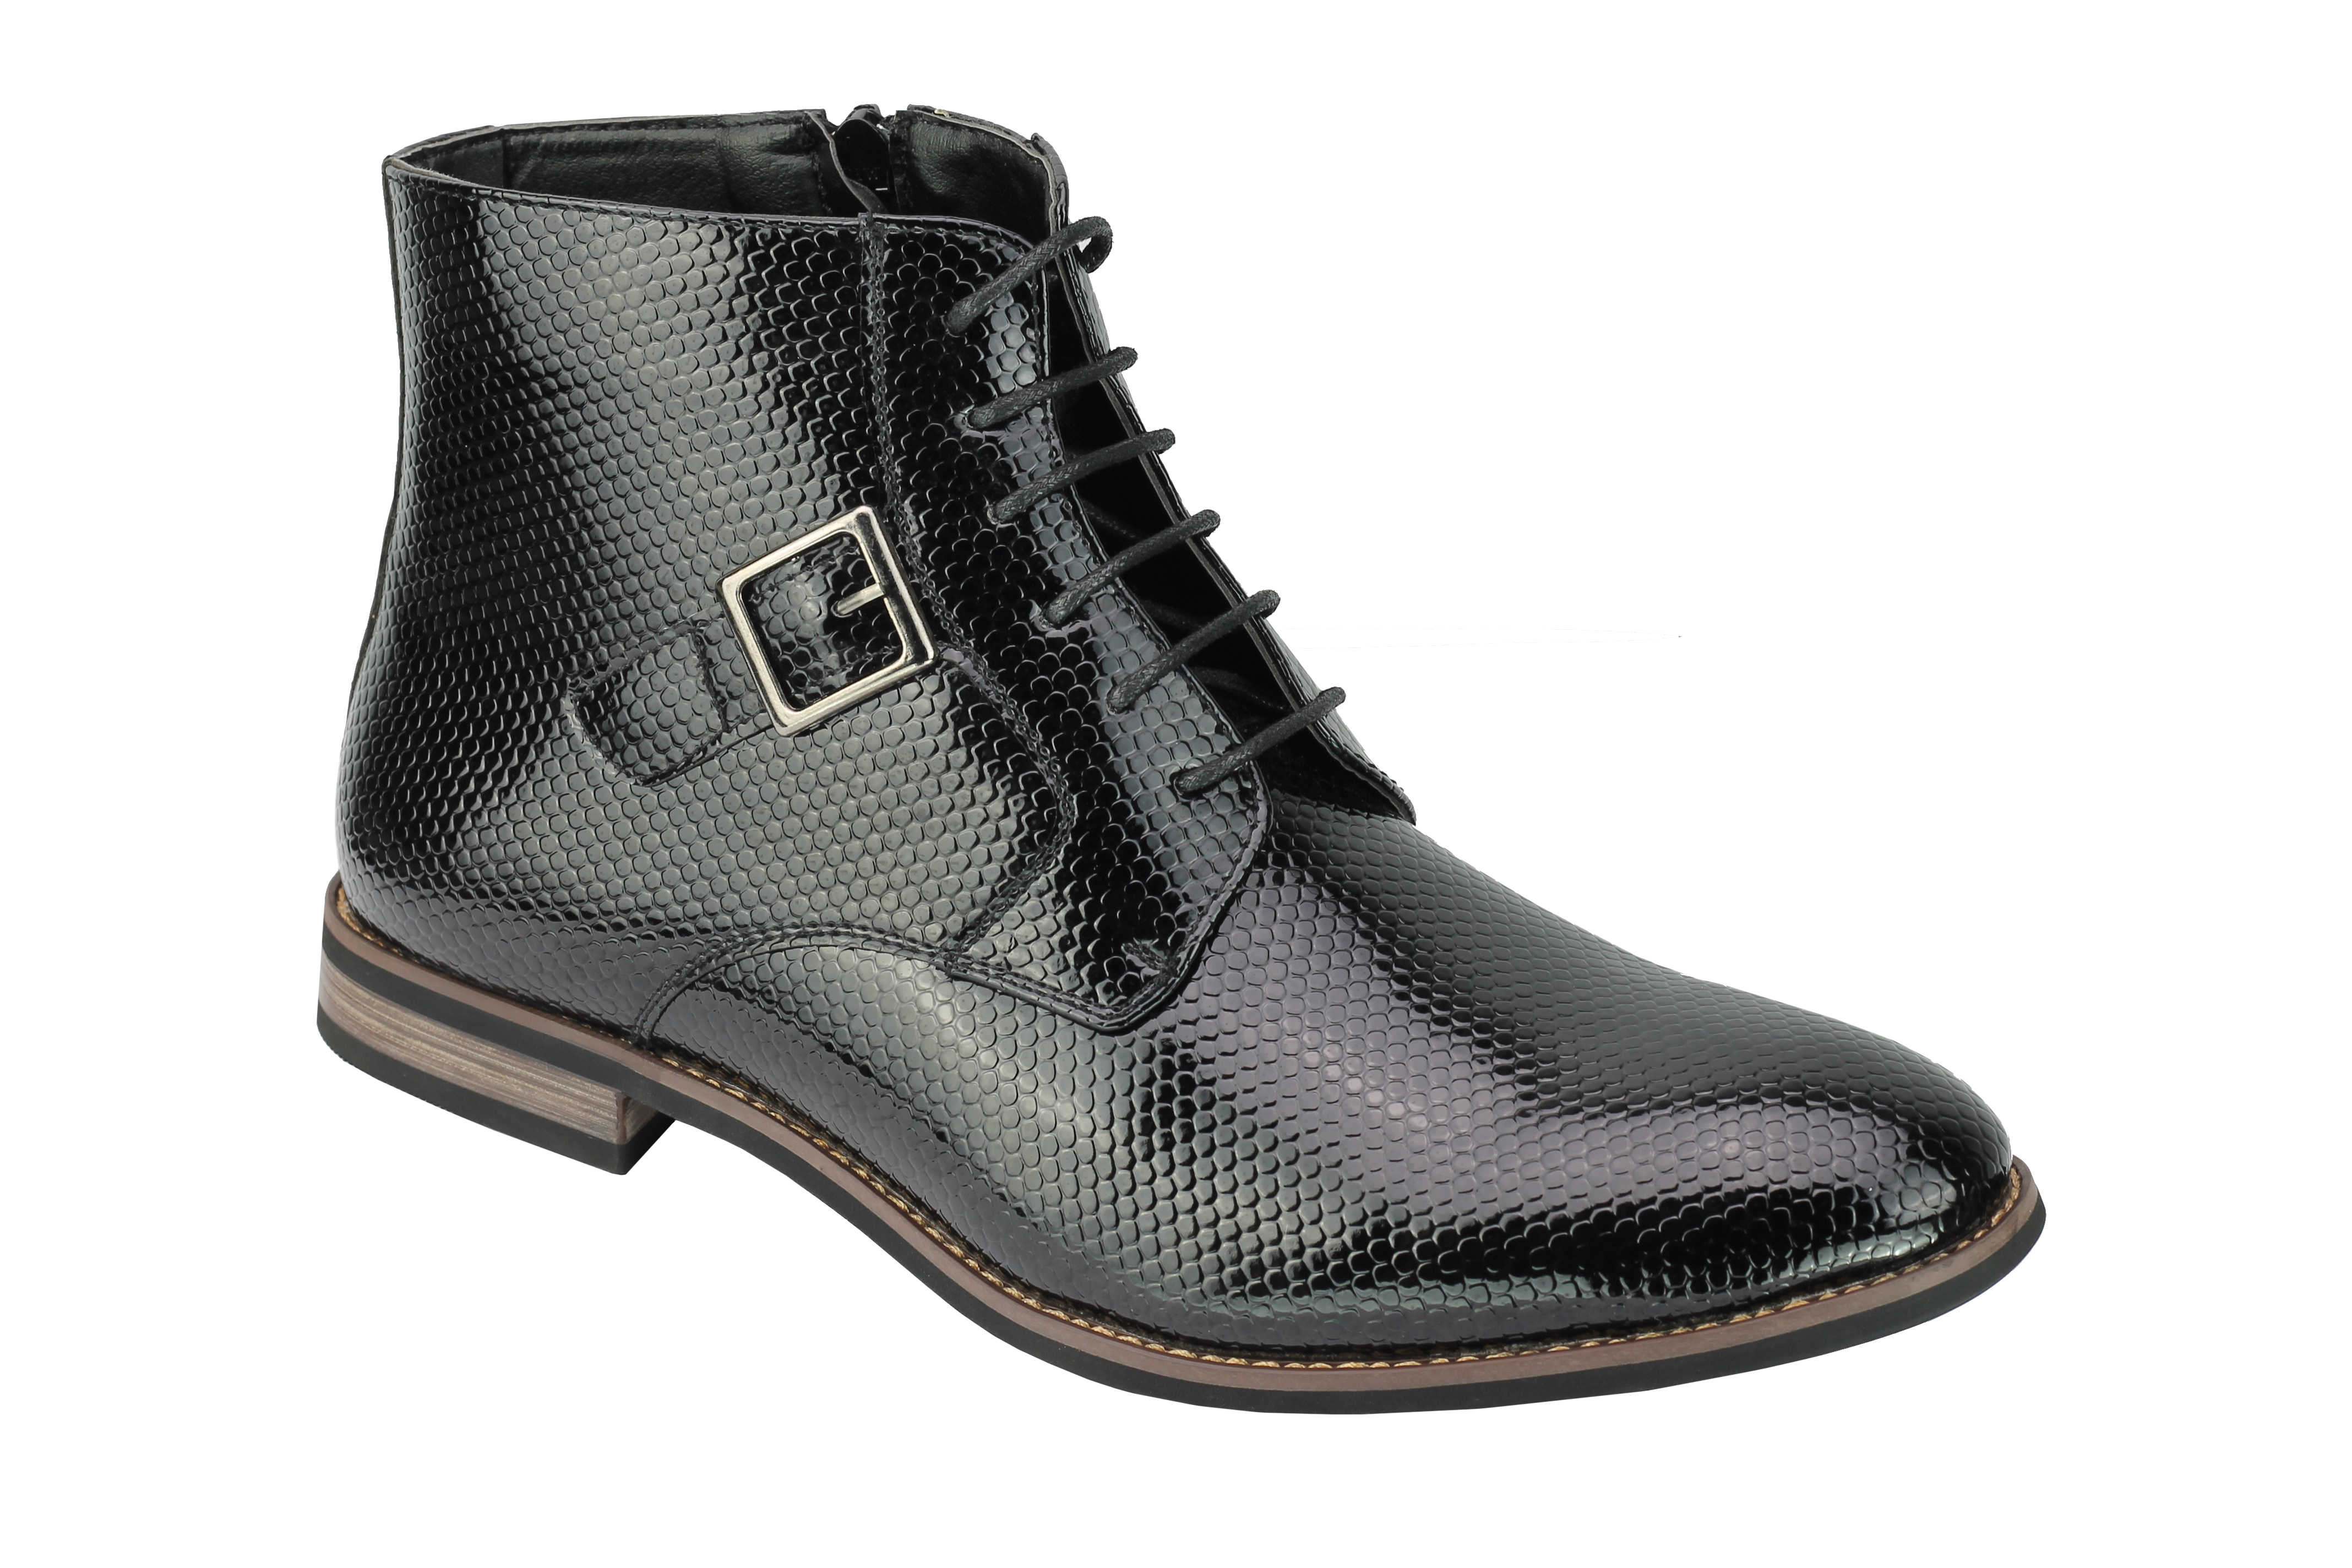 Leather Shiny Snake Skin Ankle Boots Zip